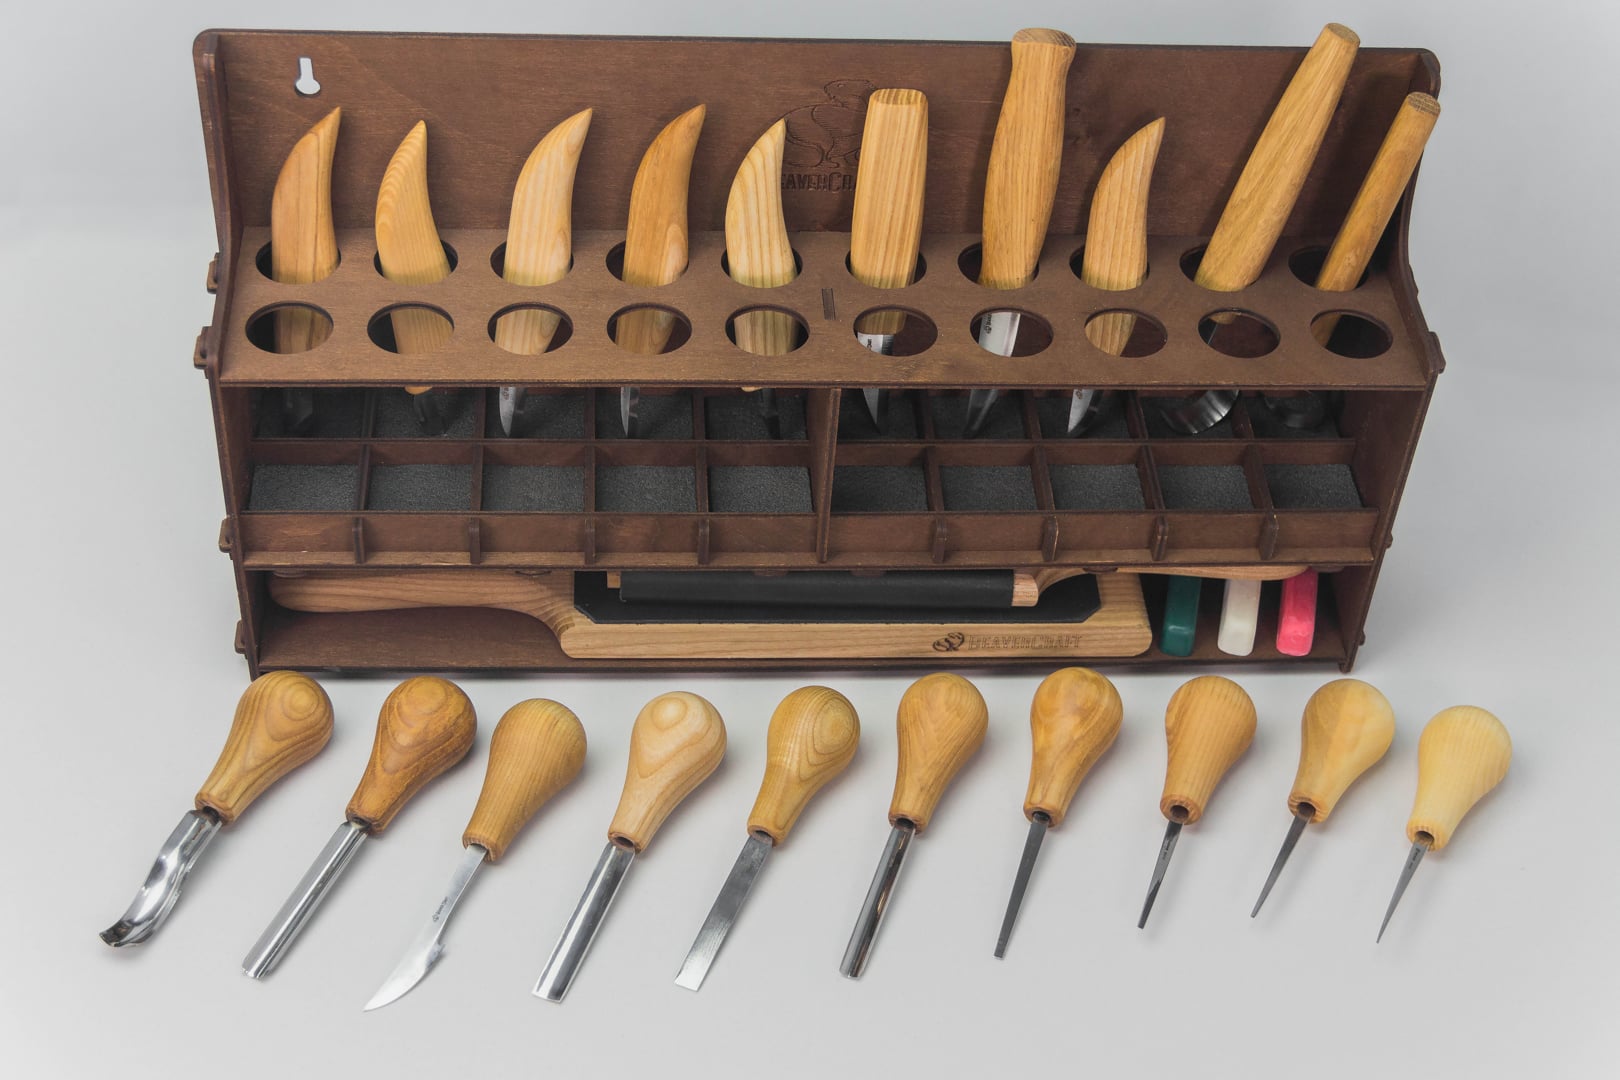 16pc Wood Carving Tool Set With Wood Knives, Carving Tools, Files Sharpening  Stone and Mallet 